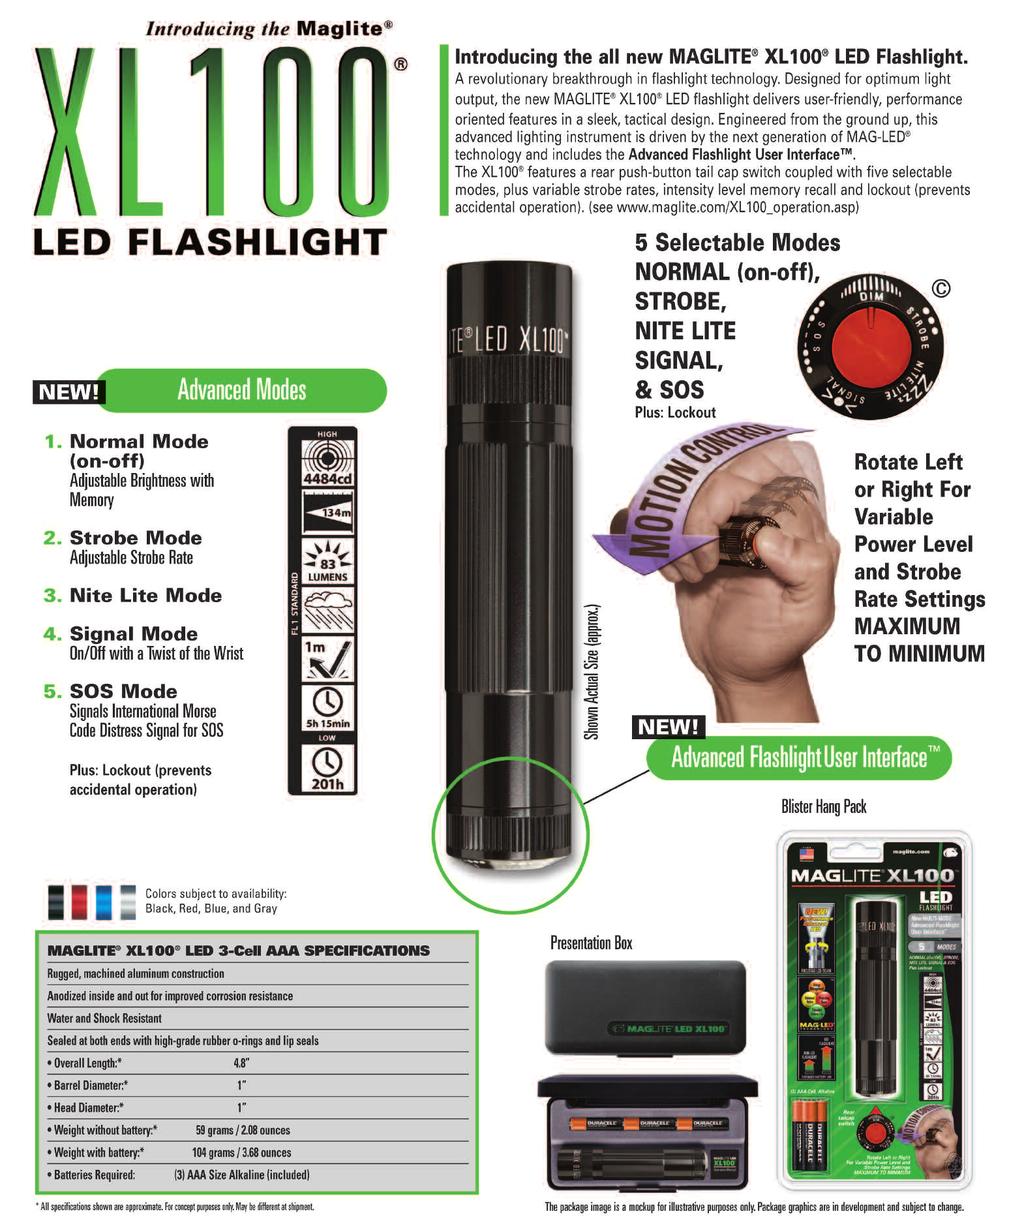 XL100 AAA-CELL LED New MULTI-MODE Advanced Flashlight User Interface Introducing the Maglite Rotate Flashlight Left or Right to Vary Power Level and Strobe Rate.